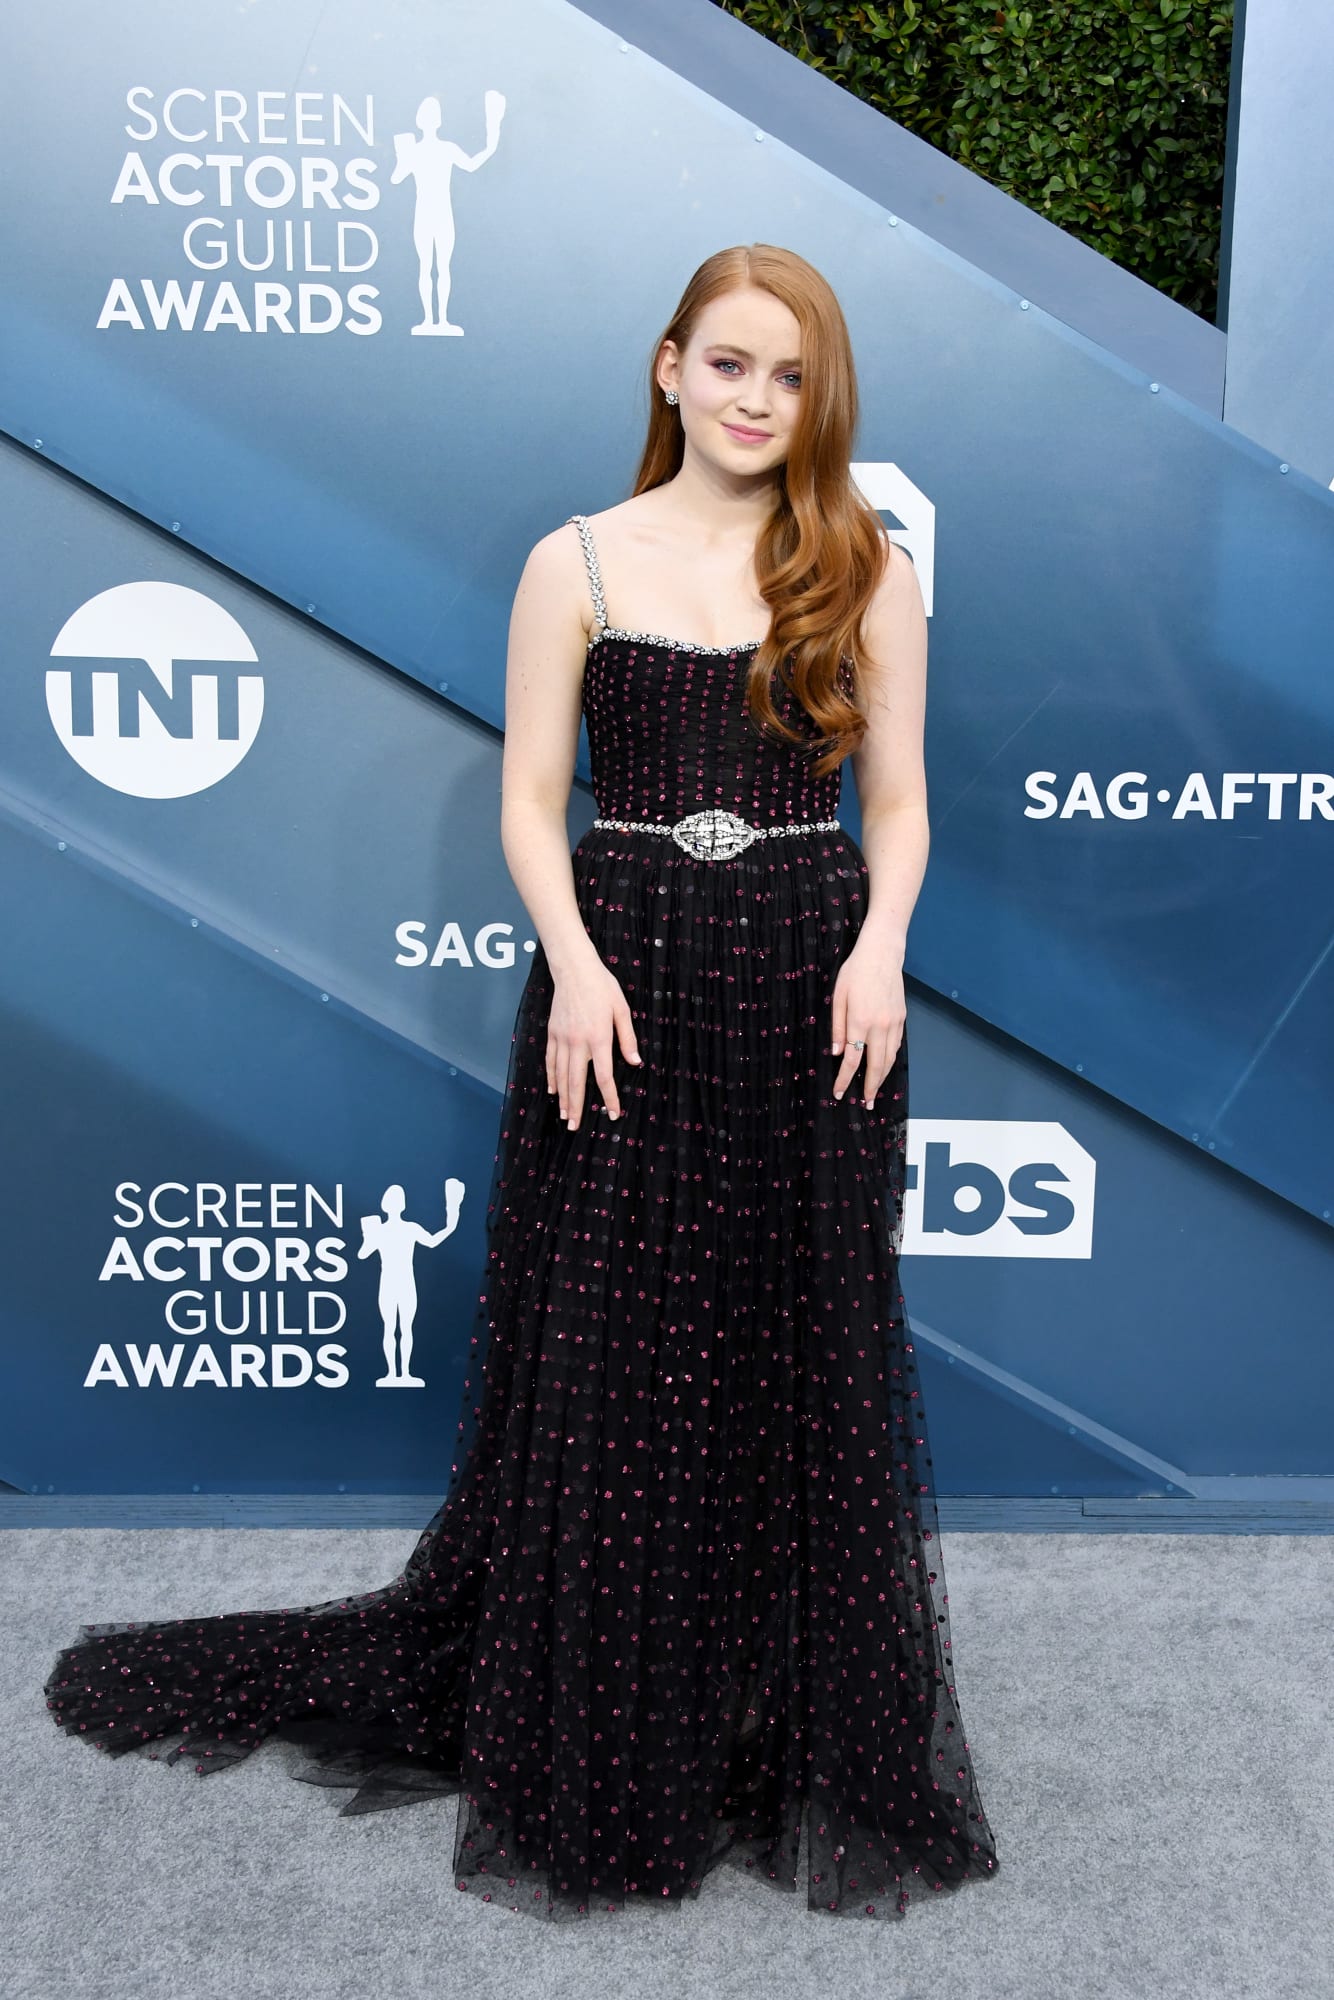 The Best Dressed Stars at the 2020 SAG Awards